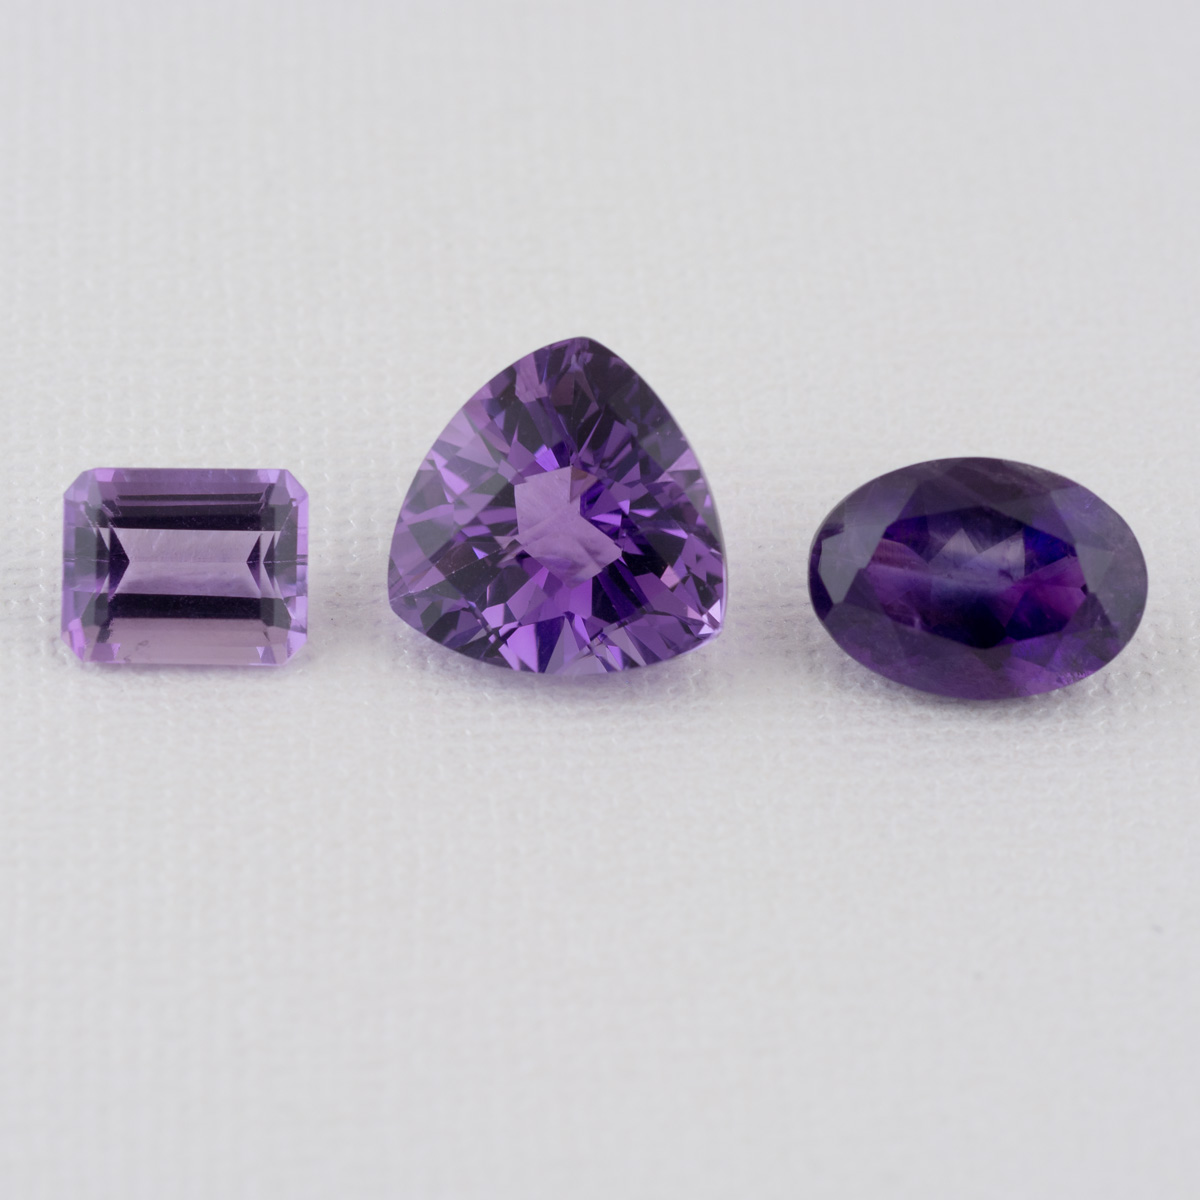 Legends about amethyst – the gem of sobriety